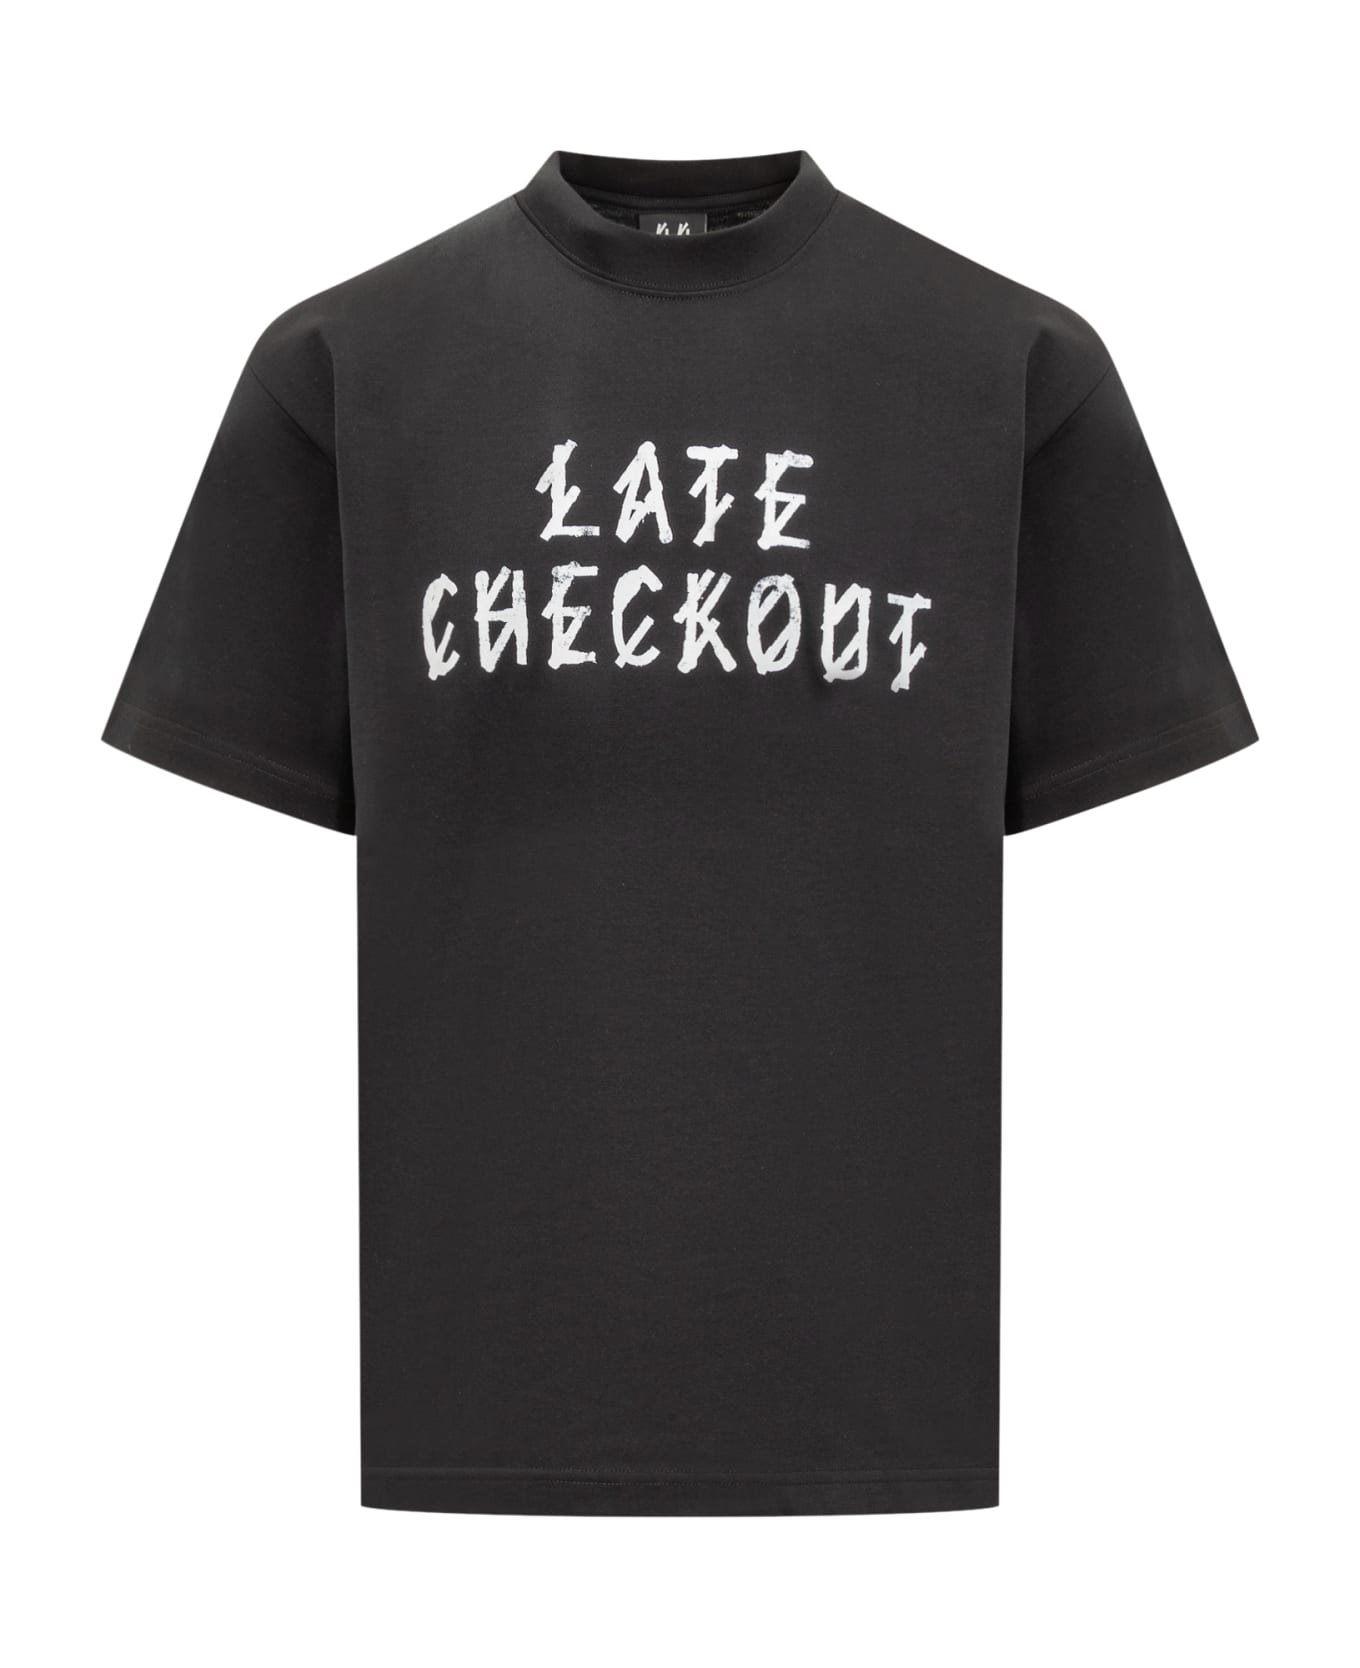 44 Label Group T-shirt With Room 44 Print - BLACK-LATE CHECKOUT